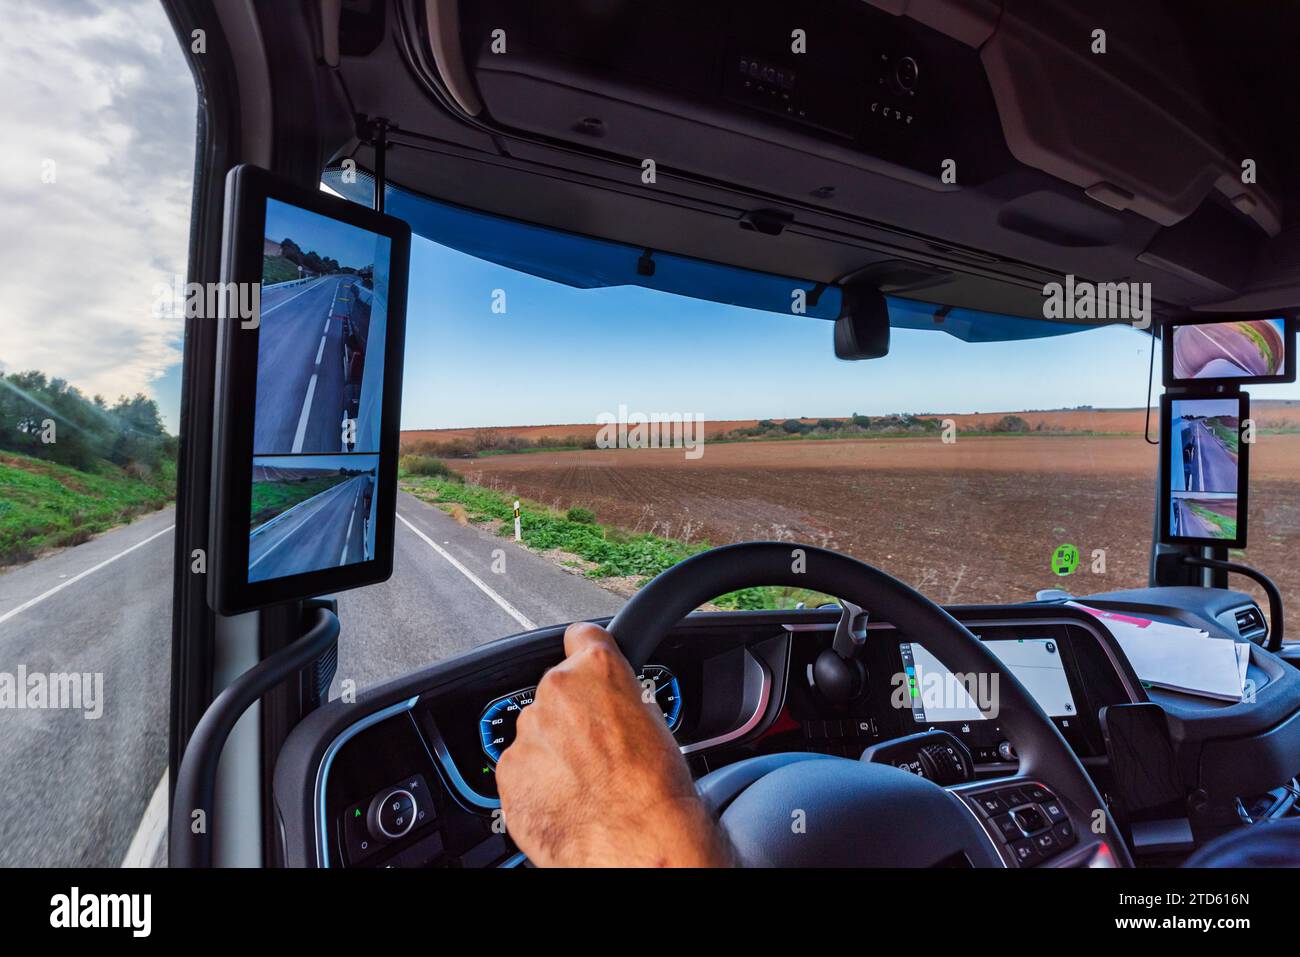 View of the interior of the cabin of a truck with camera mirrors and screens on both sides of the cabin. Stock Photo